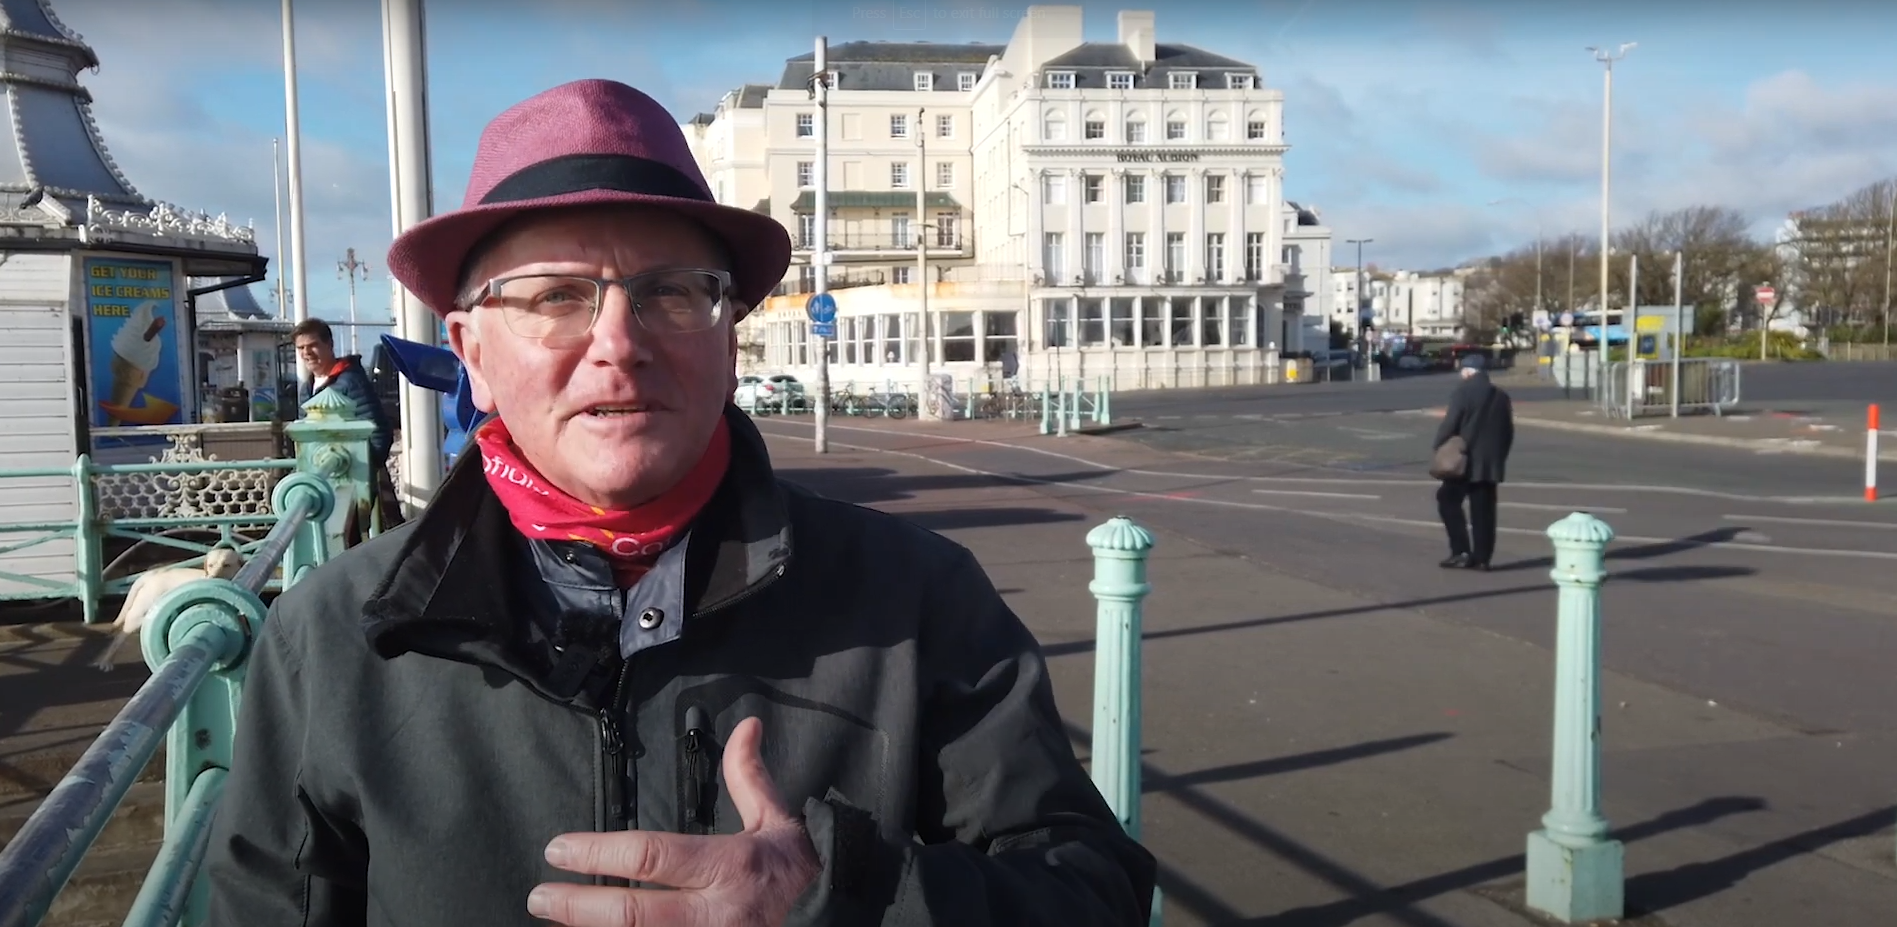 Local Musician Tim Izzard talks to the camera on brighton seafront